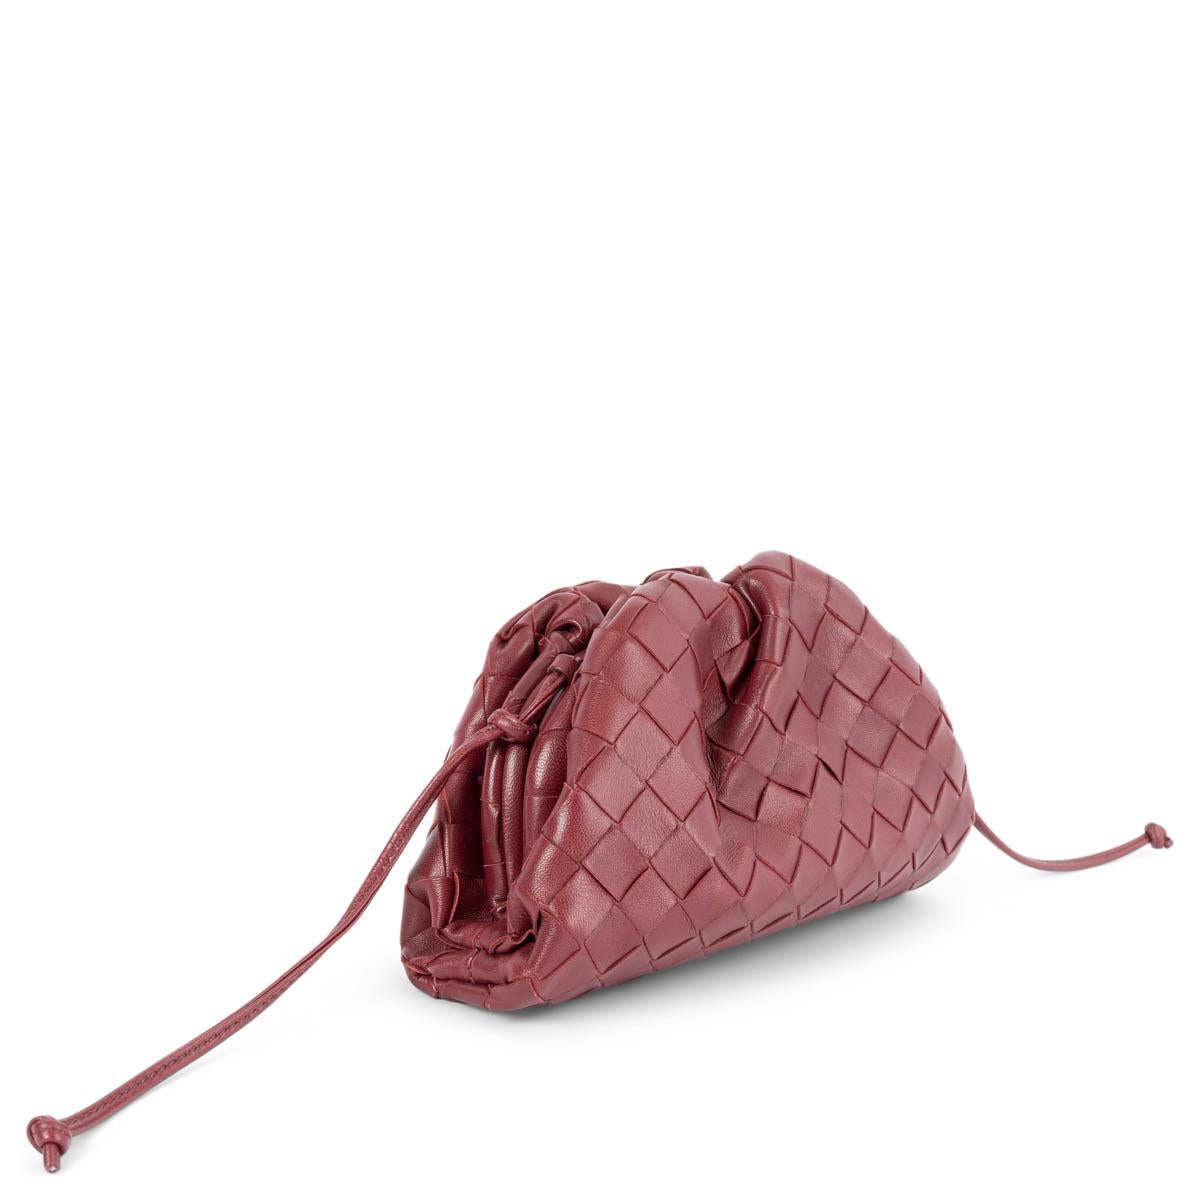 100% authentic Bottega Veneta Mini Pouch in burgundy Intrecciato lambskin. Opens with a magnetic frame closure and has a single compartment lined in calfskin. Has been carried and is in excellent condition. Comes with dust bag.